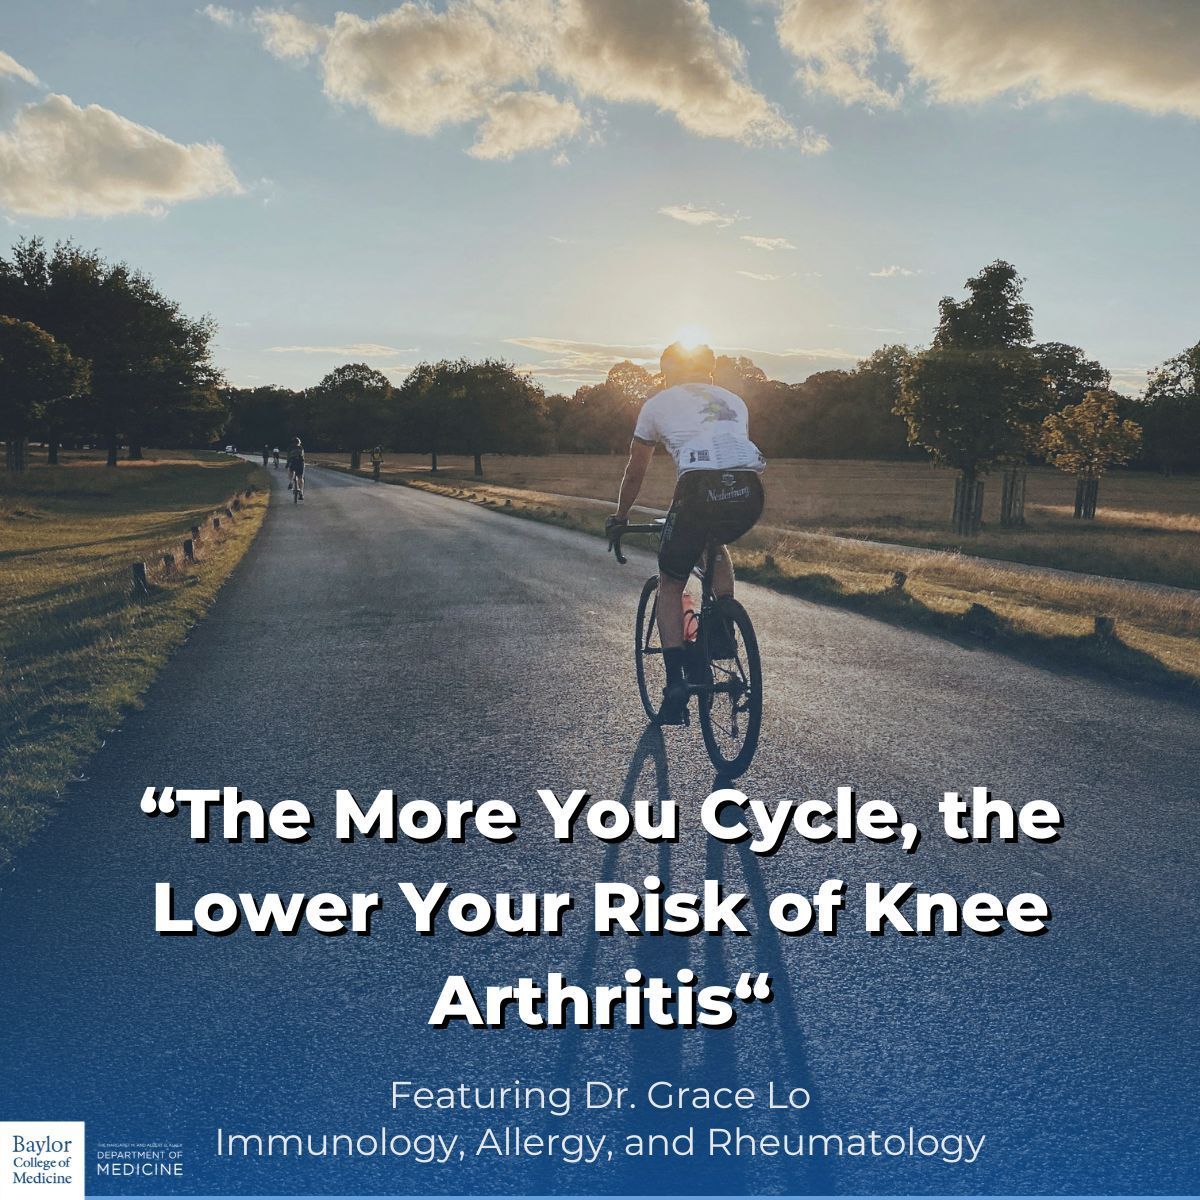 Dr. Grace Lo leads research revealing cycling's protective role against knee osteoarthritis! 🚴‍♂️ Learn more about how this activity isn't just 'not bad' but potentially great for your knees in this article. #BCMDoM Read more: buff.ly/4bss9Yy